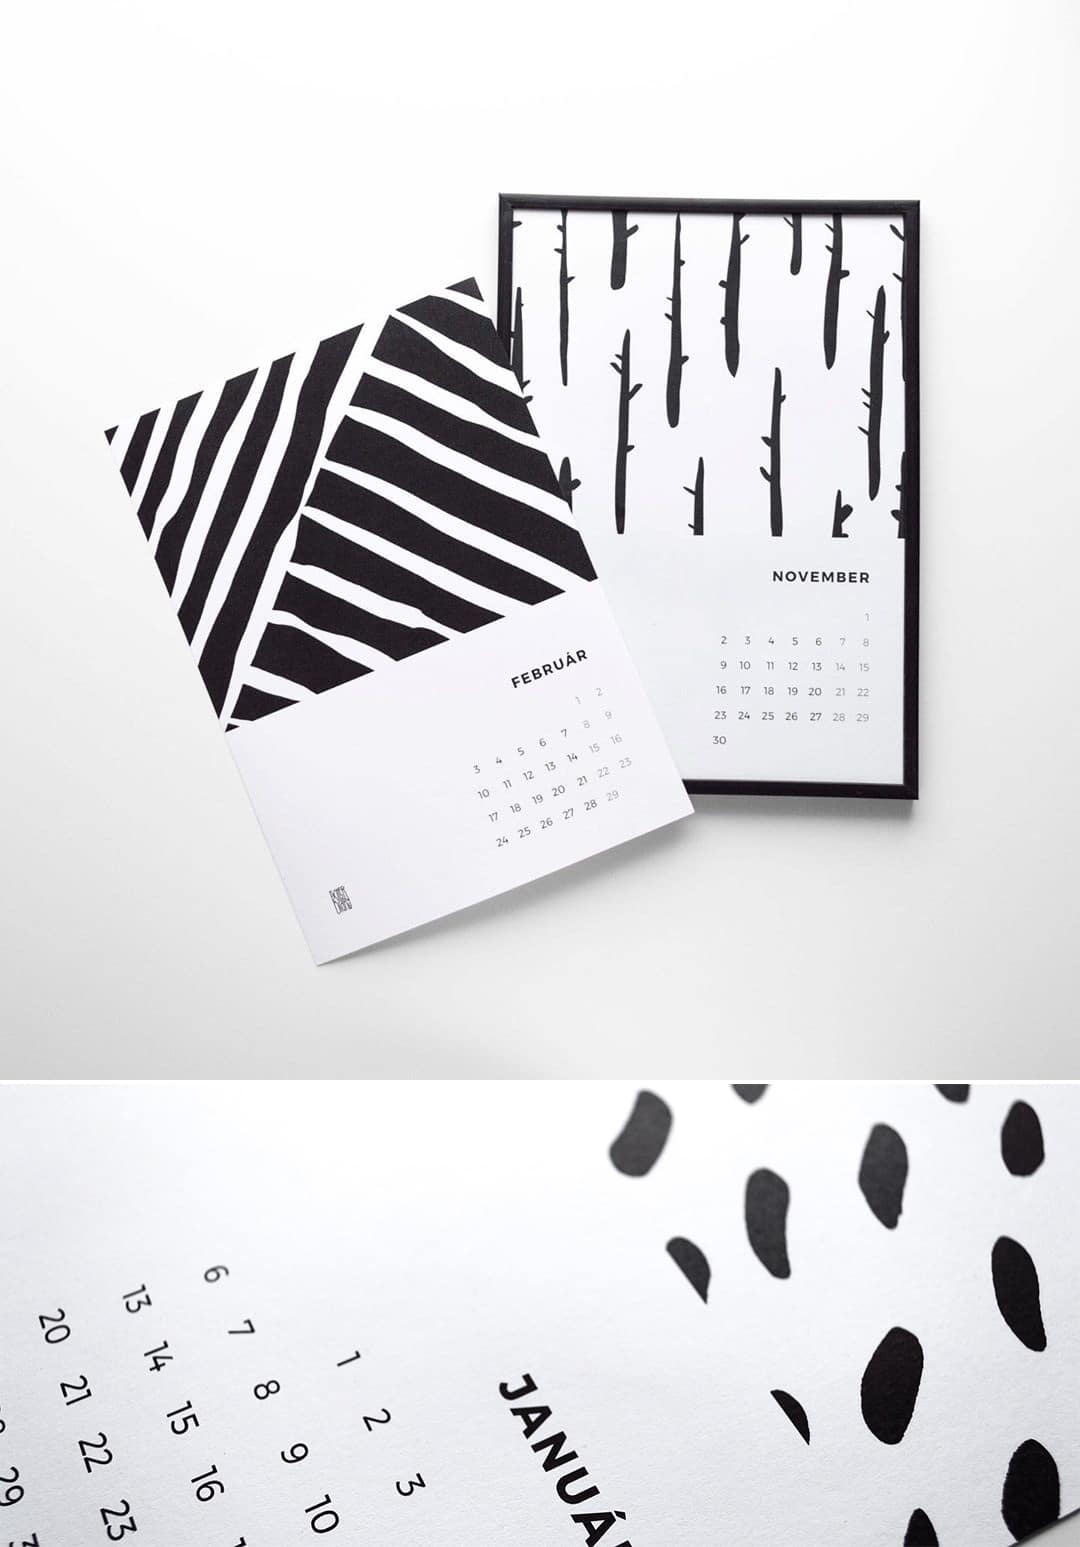 Create your own calendar in 2020 - downloadable blank calendar template | Exiter Diary